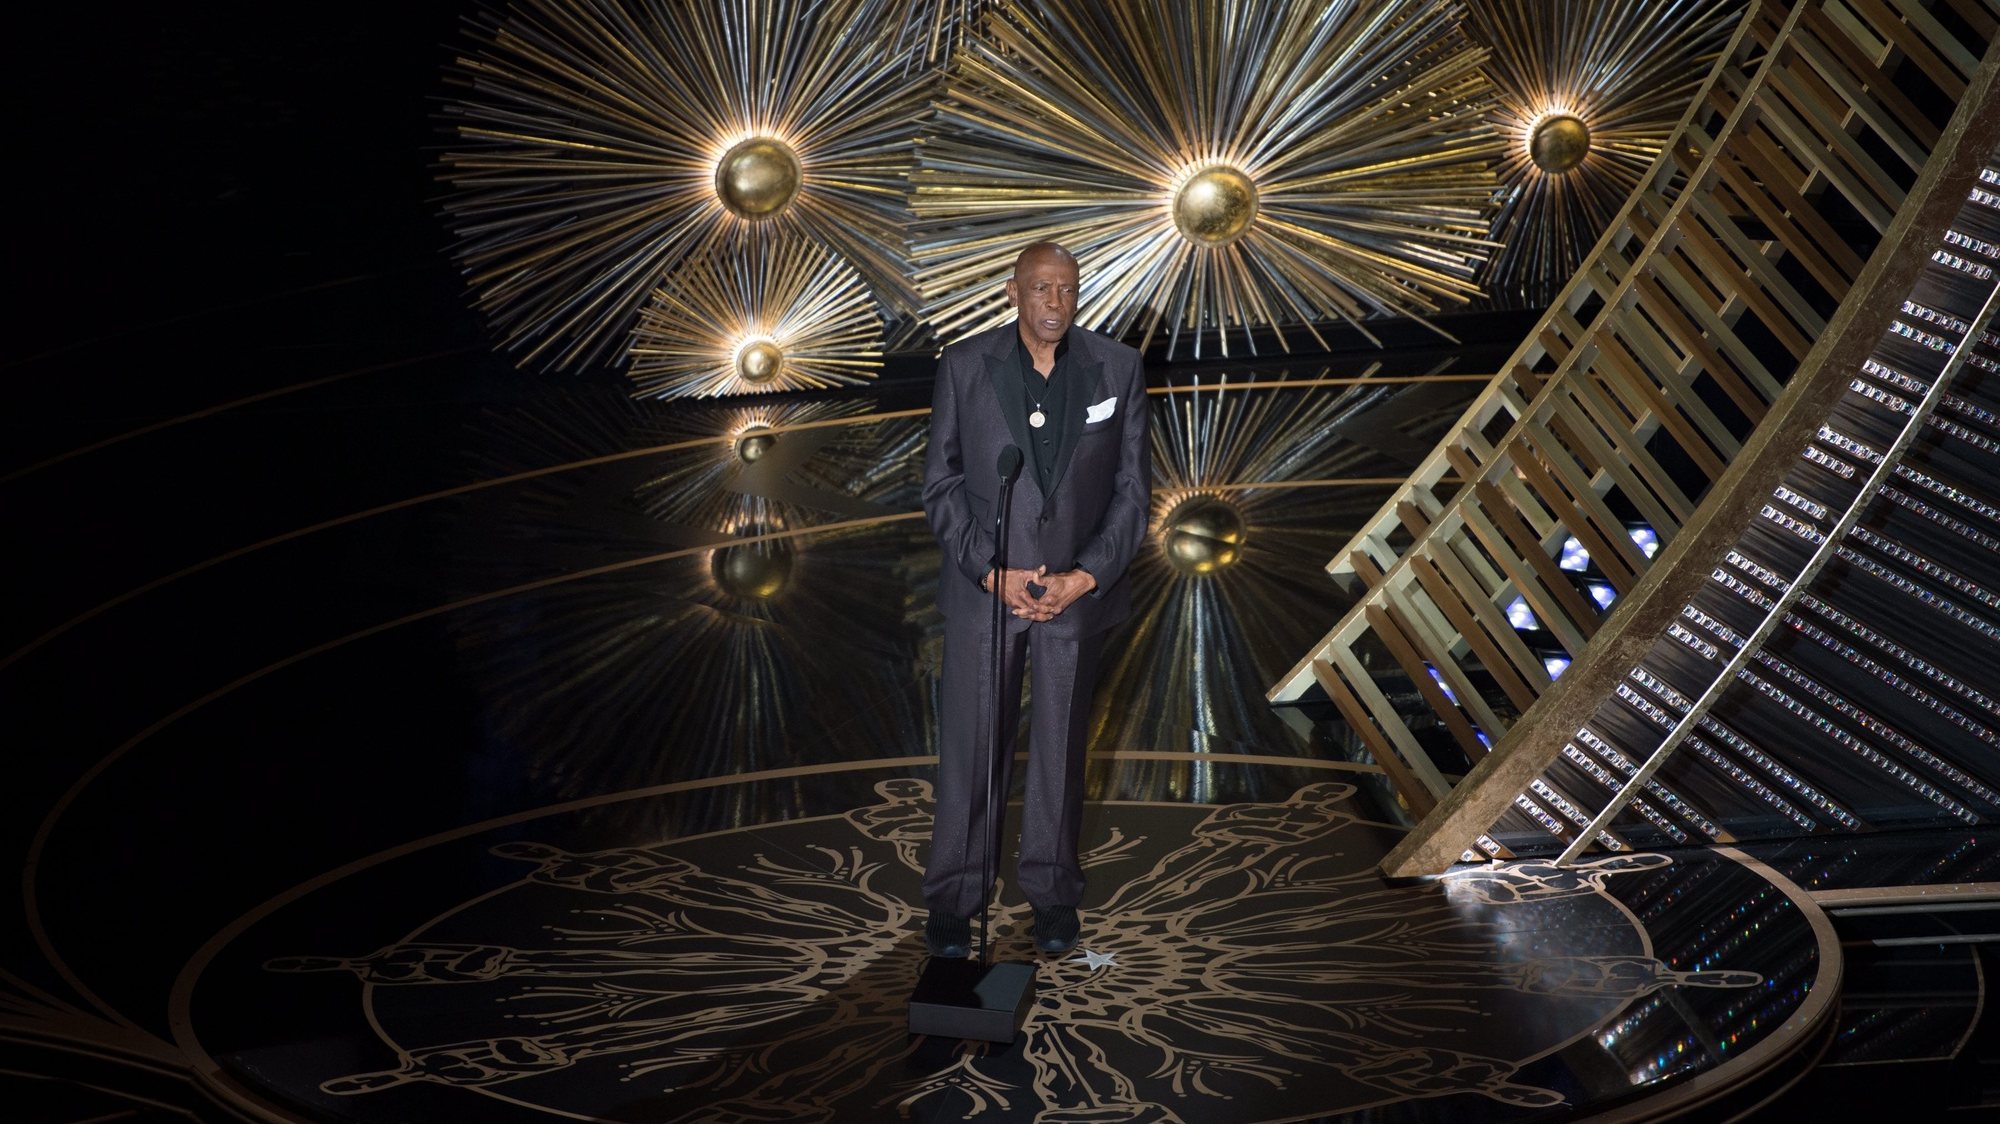 epa05187380 A handout image provided by the Academy of Motion Picture Arts and Science (AMPAS) shows Louis Gossett Jr. presenting during the live ABC Telecast of the 88th annual Academy Awards ceremony at the Dolby Theatre in Hollywood, California, USA, 28 February 2016. The Oscars were presented for outstanding individual or collective efforts in 24 categories in filmmaking.  EPA/VALERIE DURANT / AMPAS / HANDOUT THE IMAGE MAY NOT BE ALTERED AND IS FREE FOR EDITORIAL USE ONY IN REPORTING ABOUT THE EVENT. ONE TIME USE ONLY. MANDATORY CREDIT. HANDOUT EDITORIAL USE ONLY/NO SALES/NO ARCHIVES